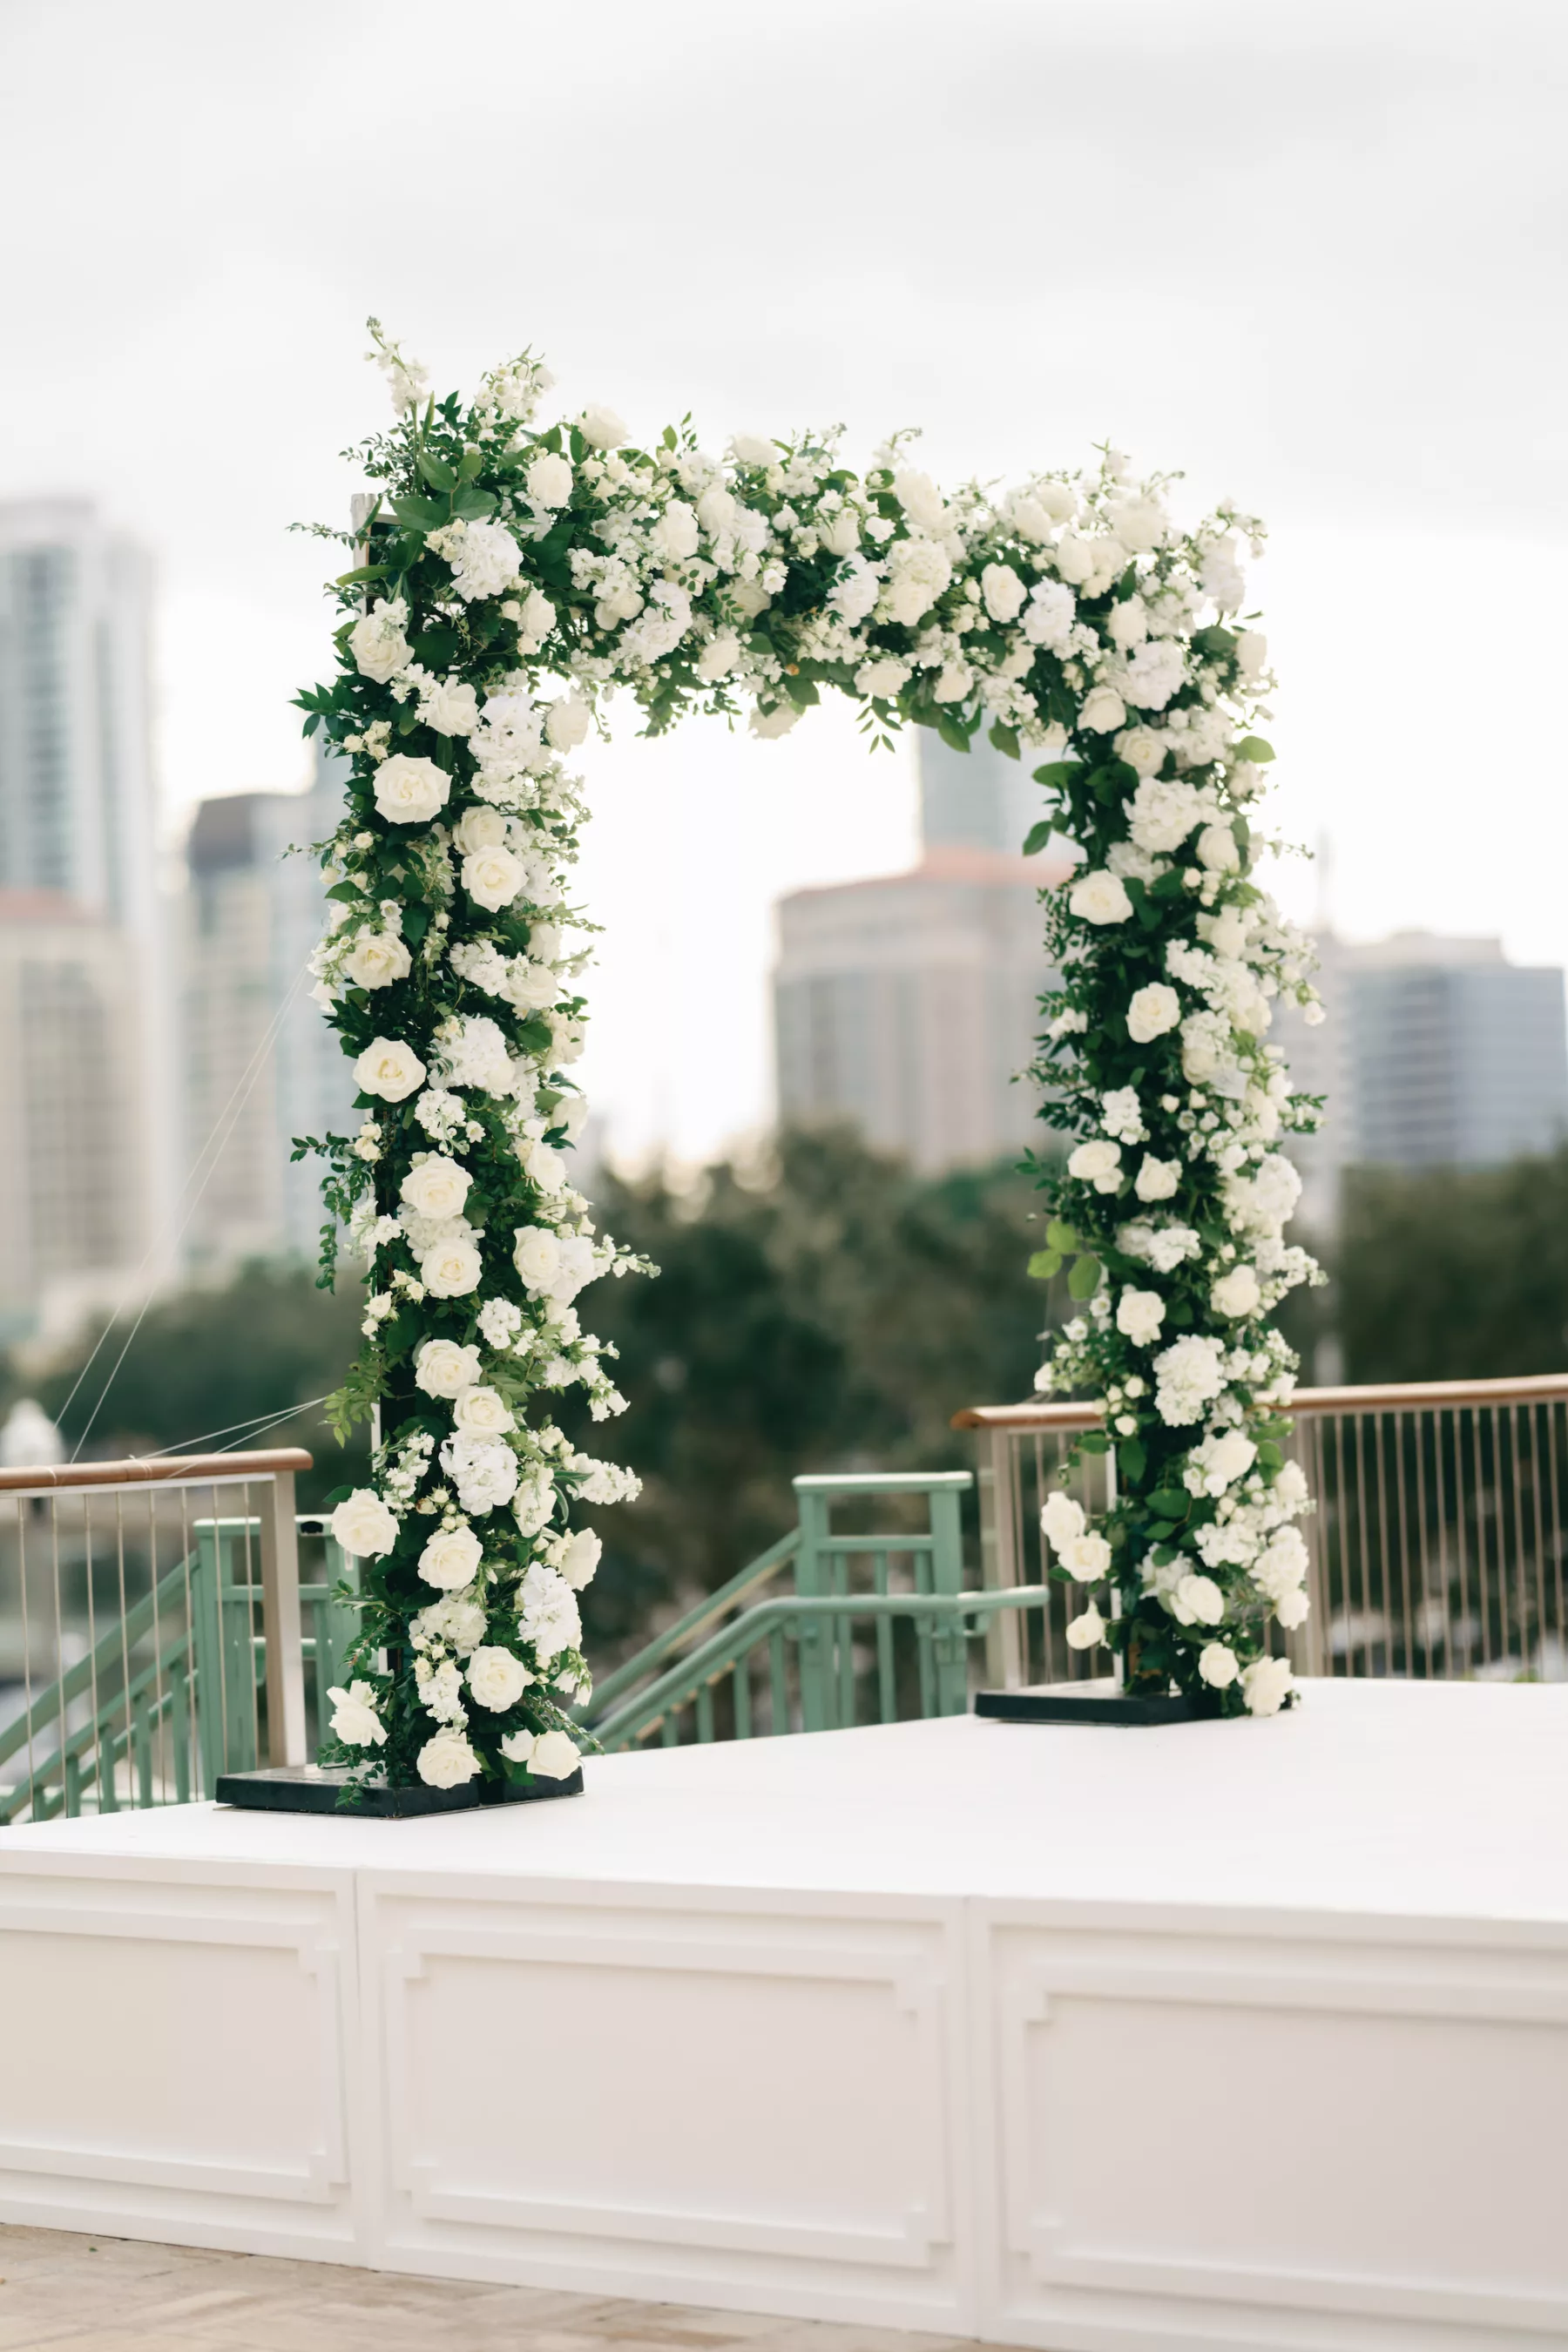 Timeless Outdoor Waterfront Winter Wedding Ceremony with White Rose and Greenery Arch and Stage Inspiration